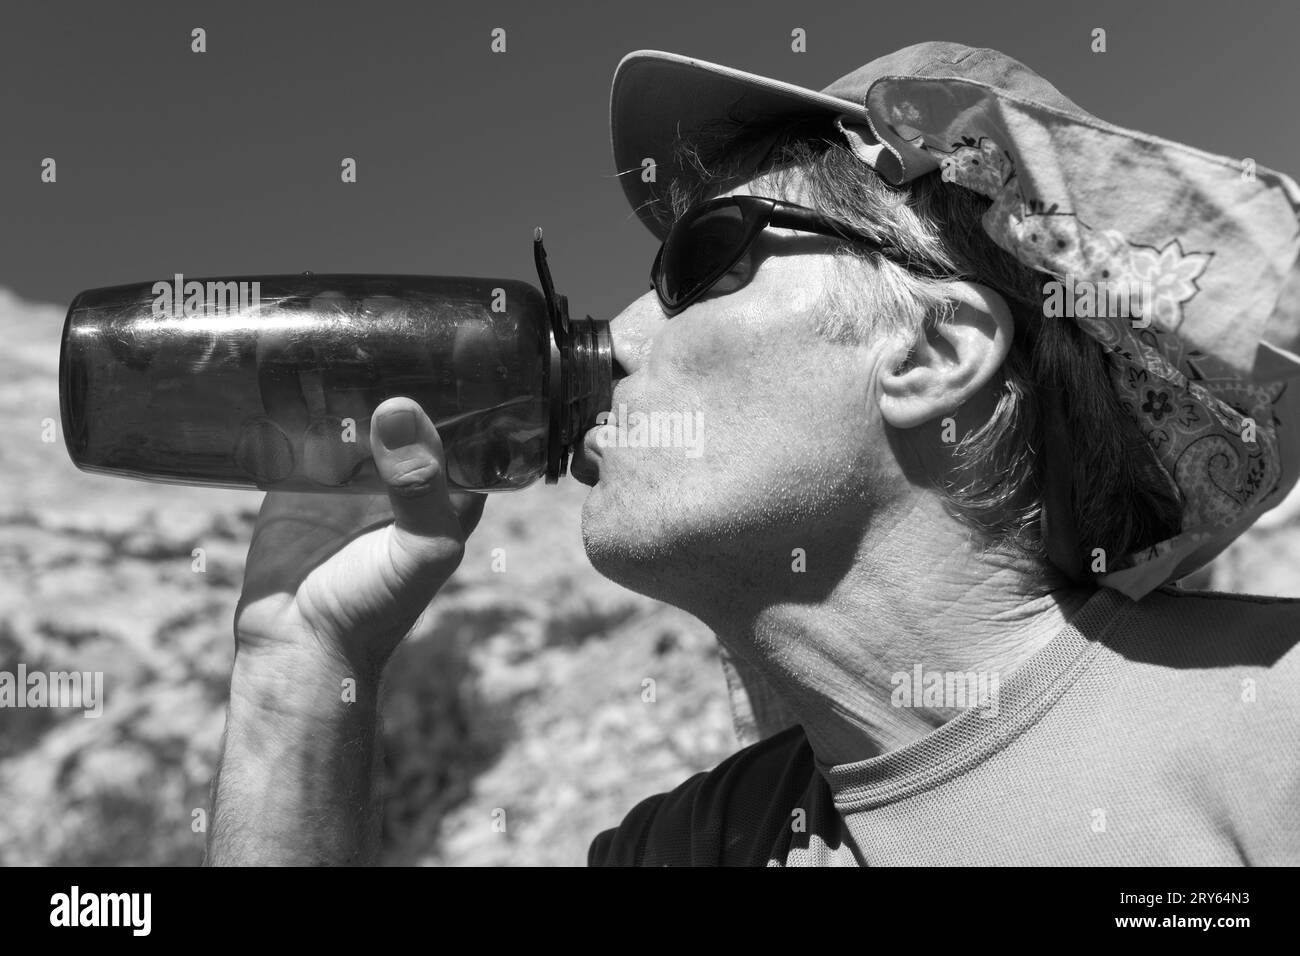 A mature man drinking from a water bottle. Stock Photo